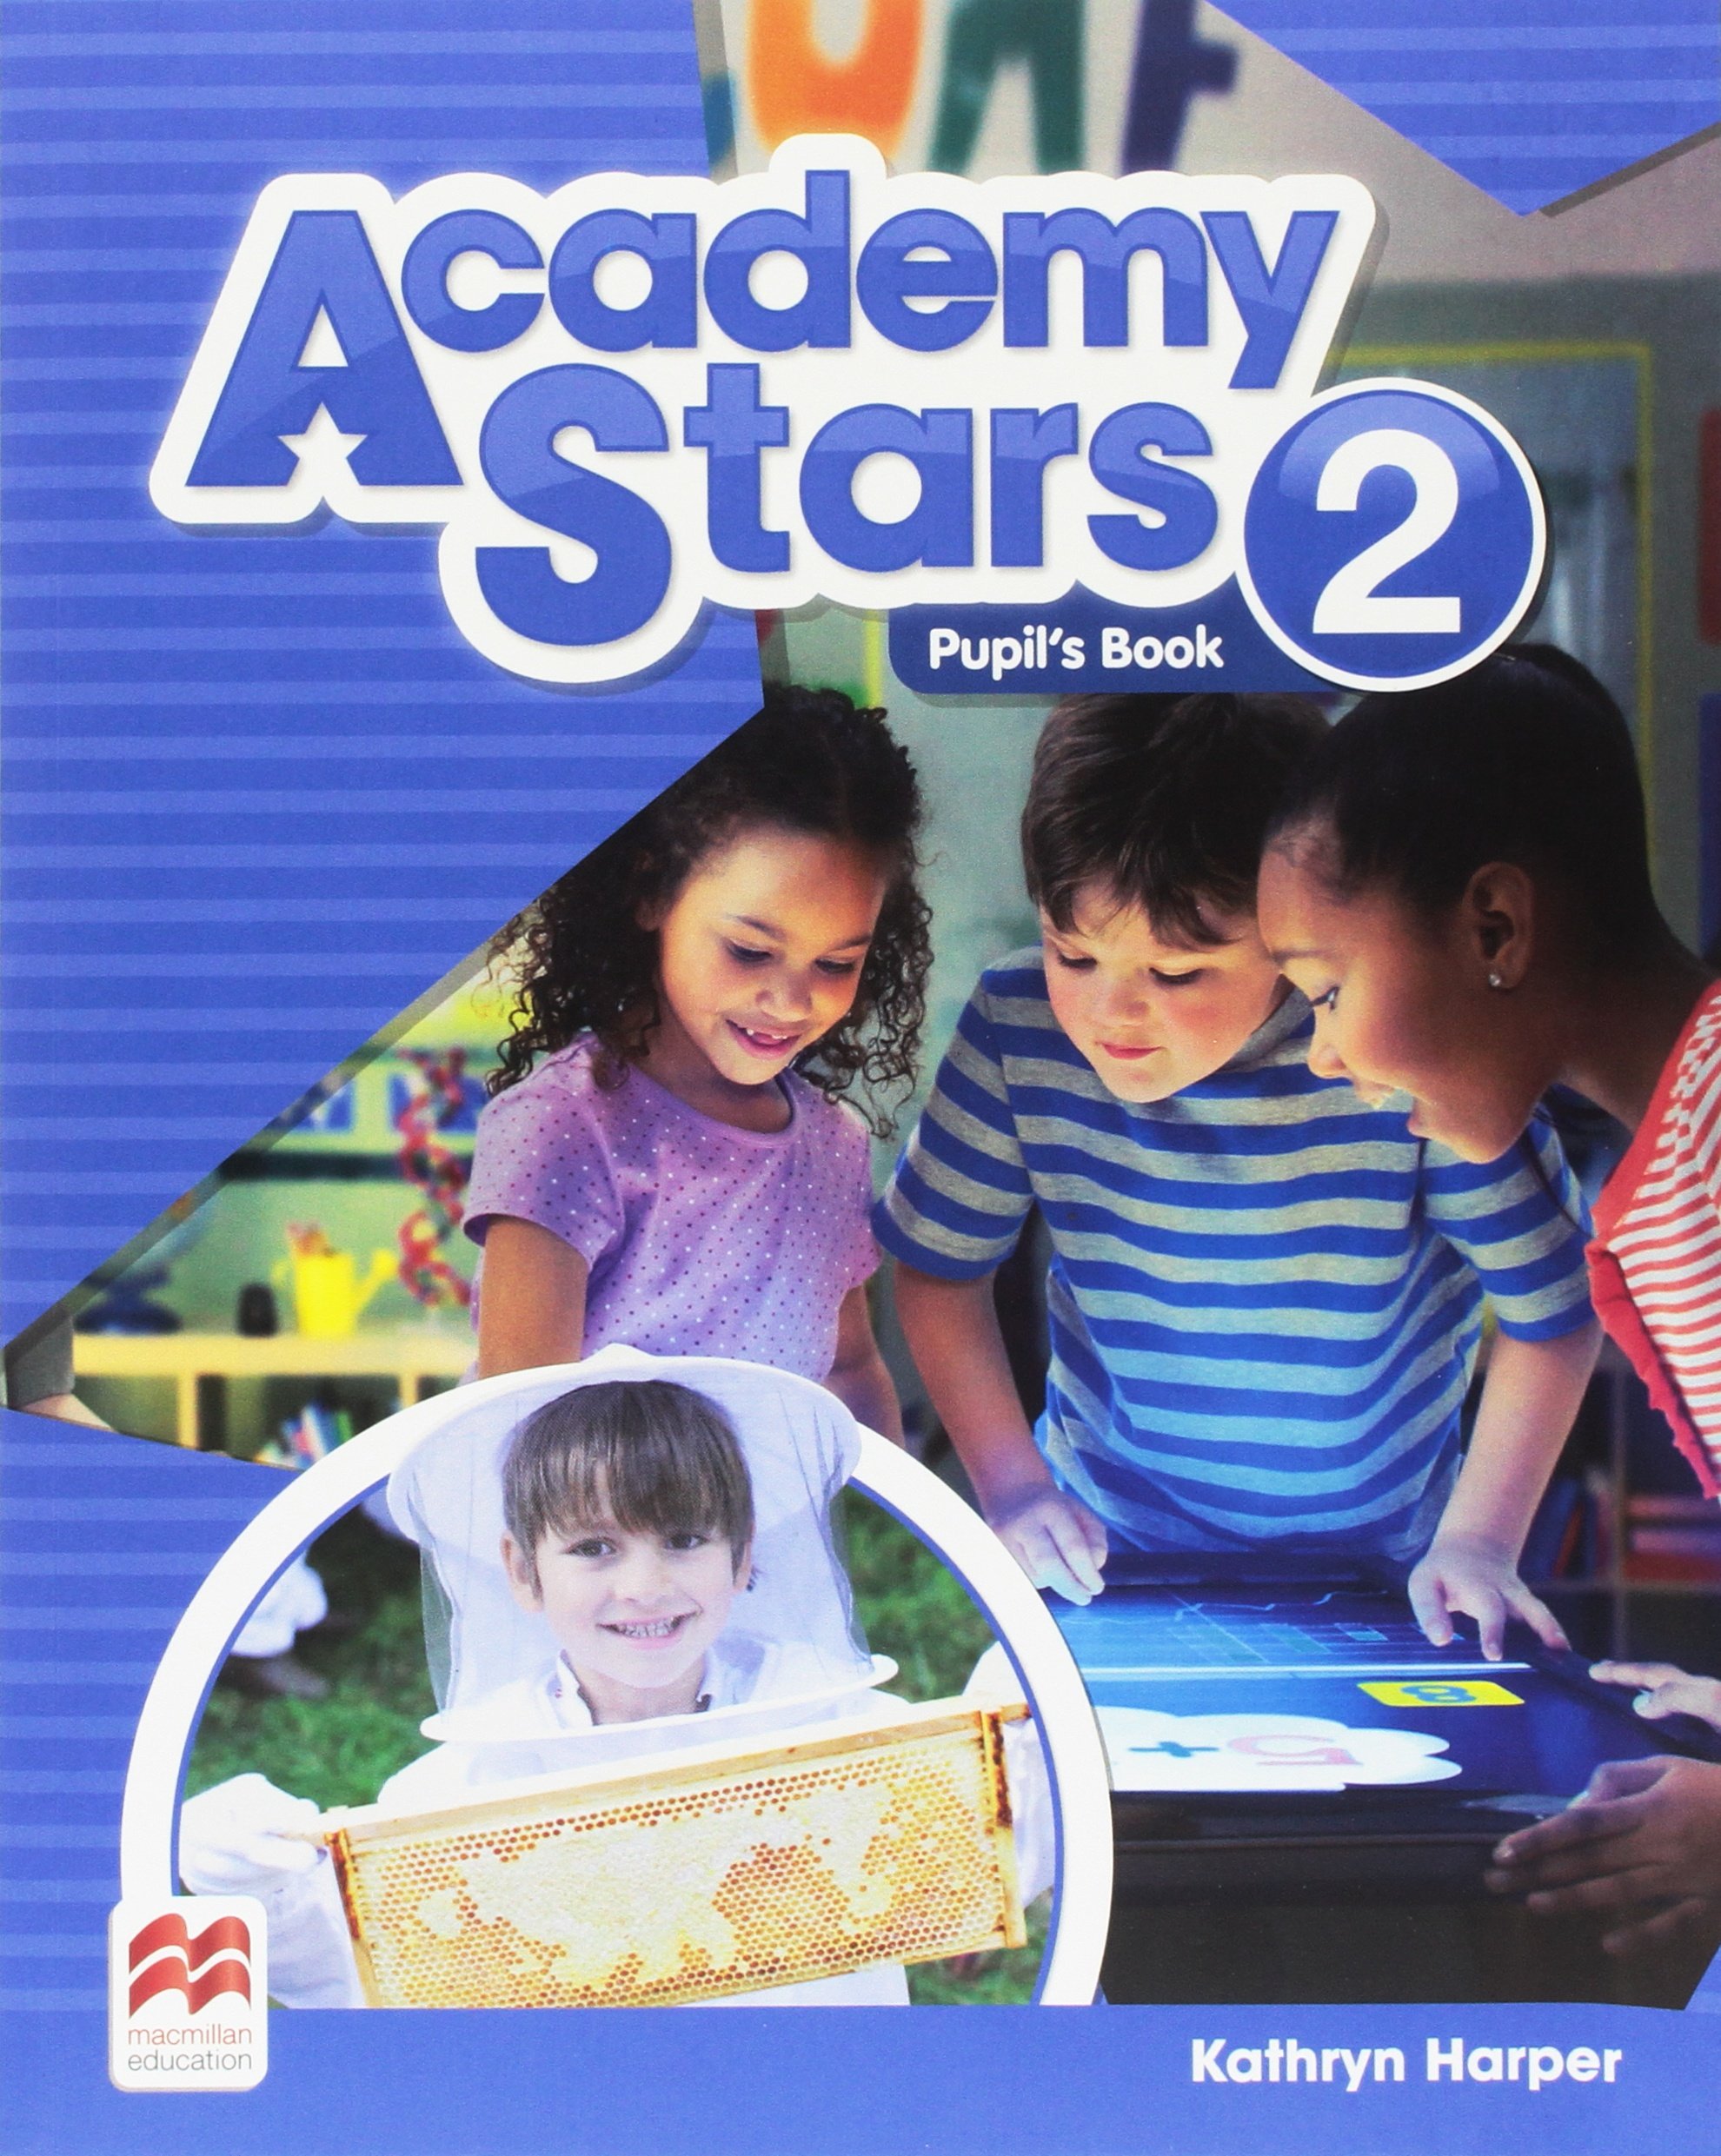 ACADEMY STARS 2 Pupil's Book Pack